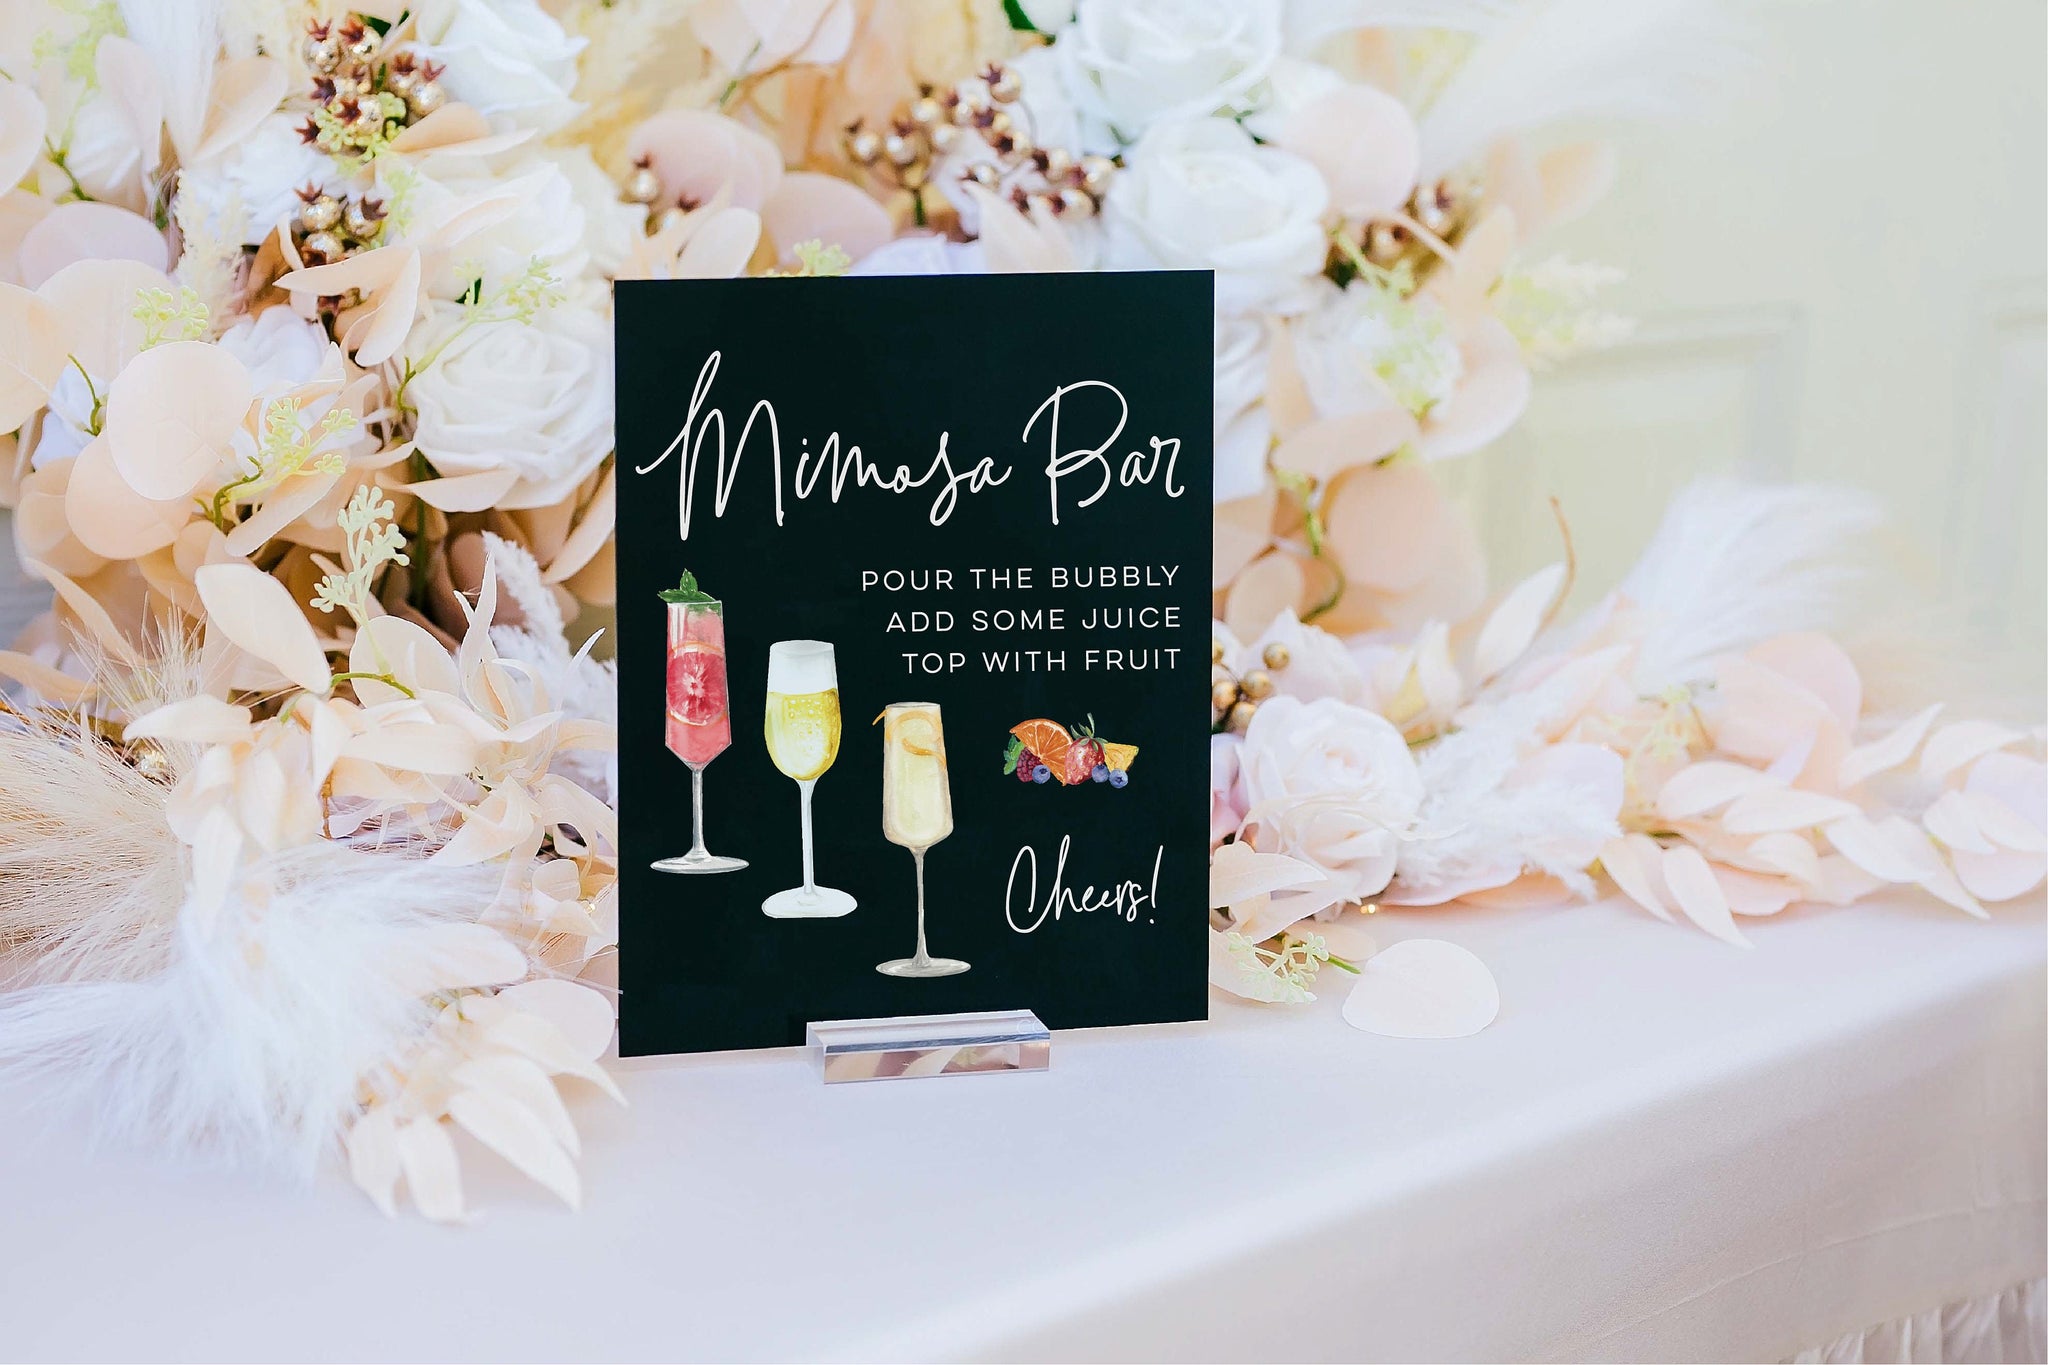 Mimosa Bar with Blueberries, Open Bar Wedding Bar Menu Sign and